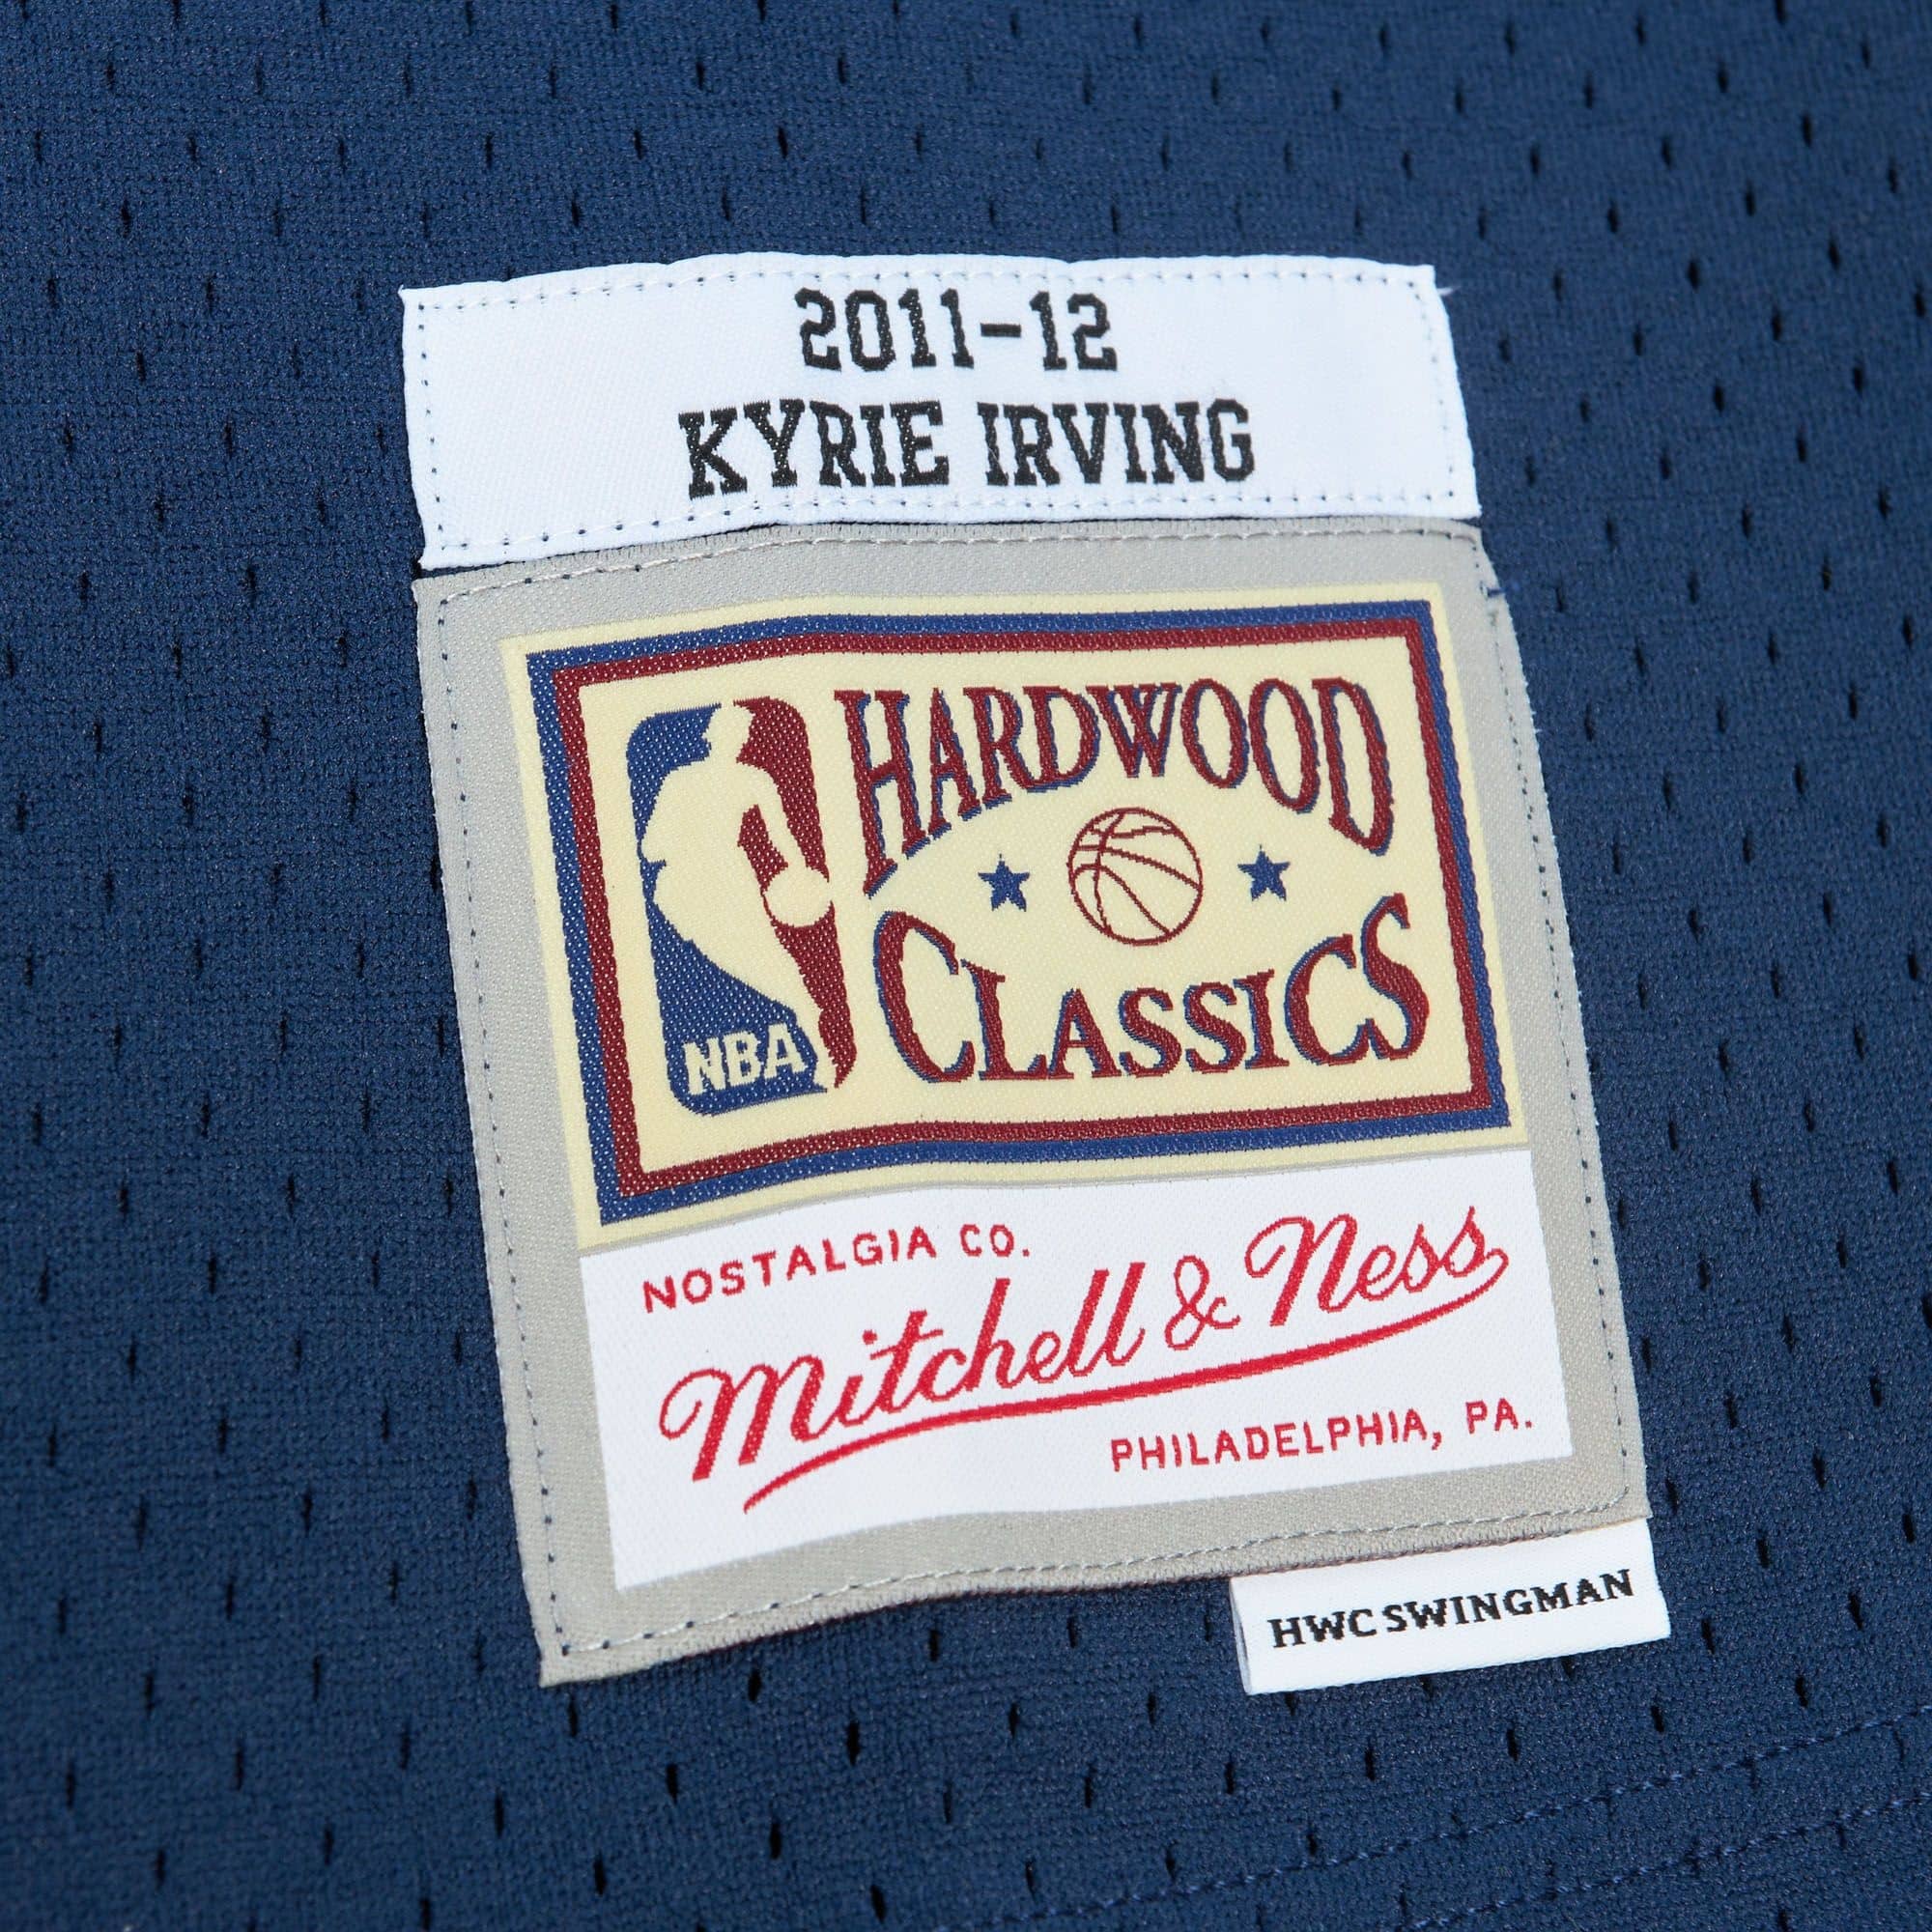 MNA-H34 (Mitchell and ness swingman jersey cavaliers kir 11-12 home blue) 122398695